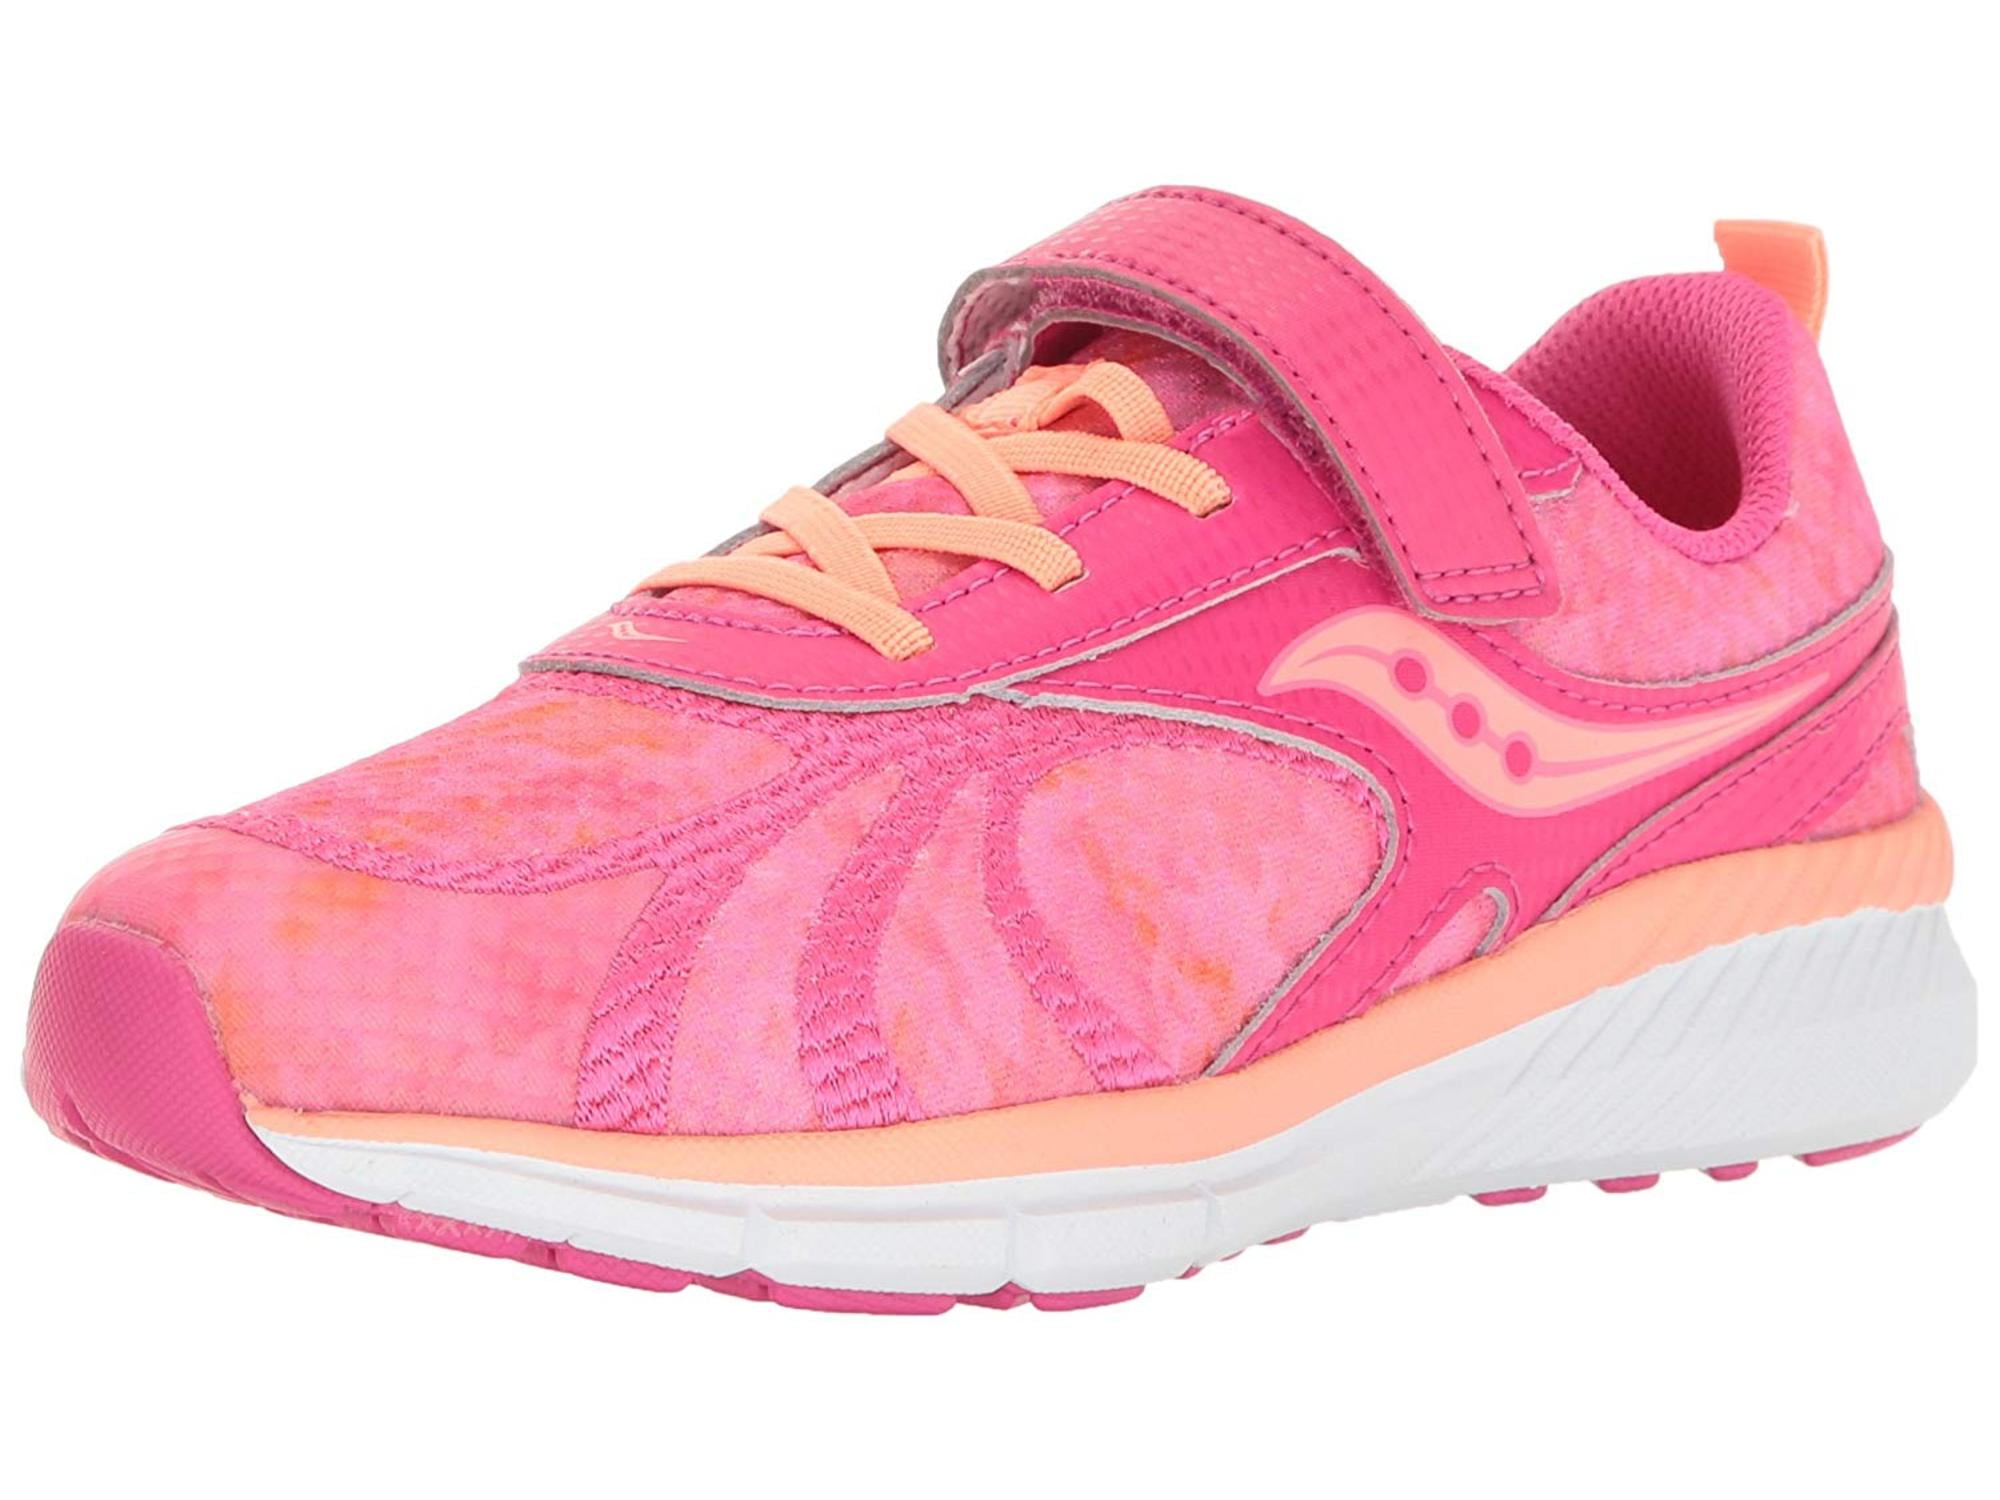 saucony shoes kids pink